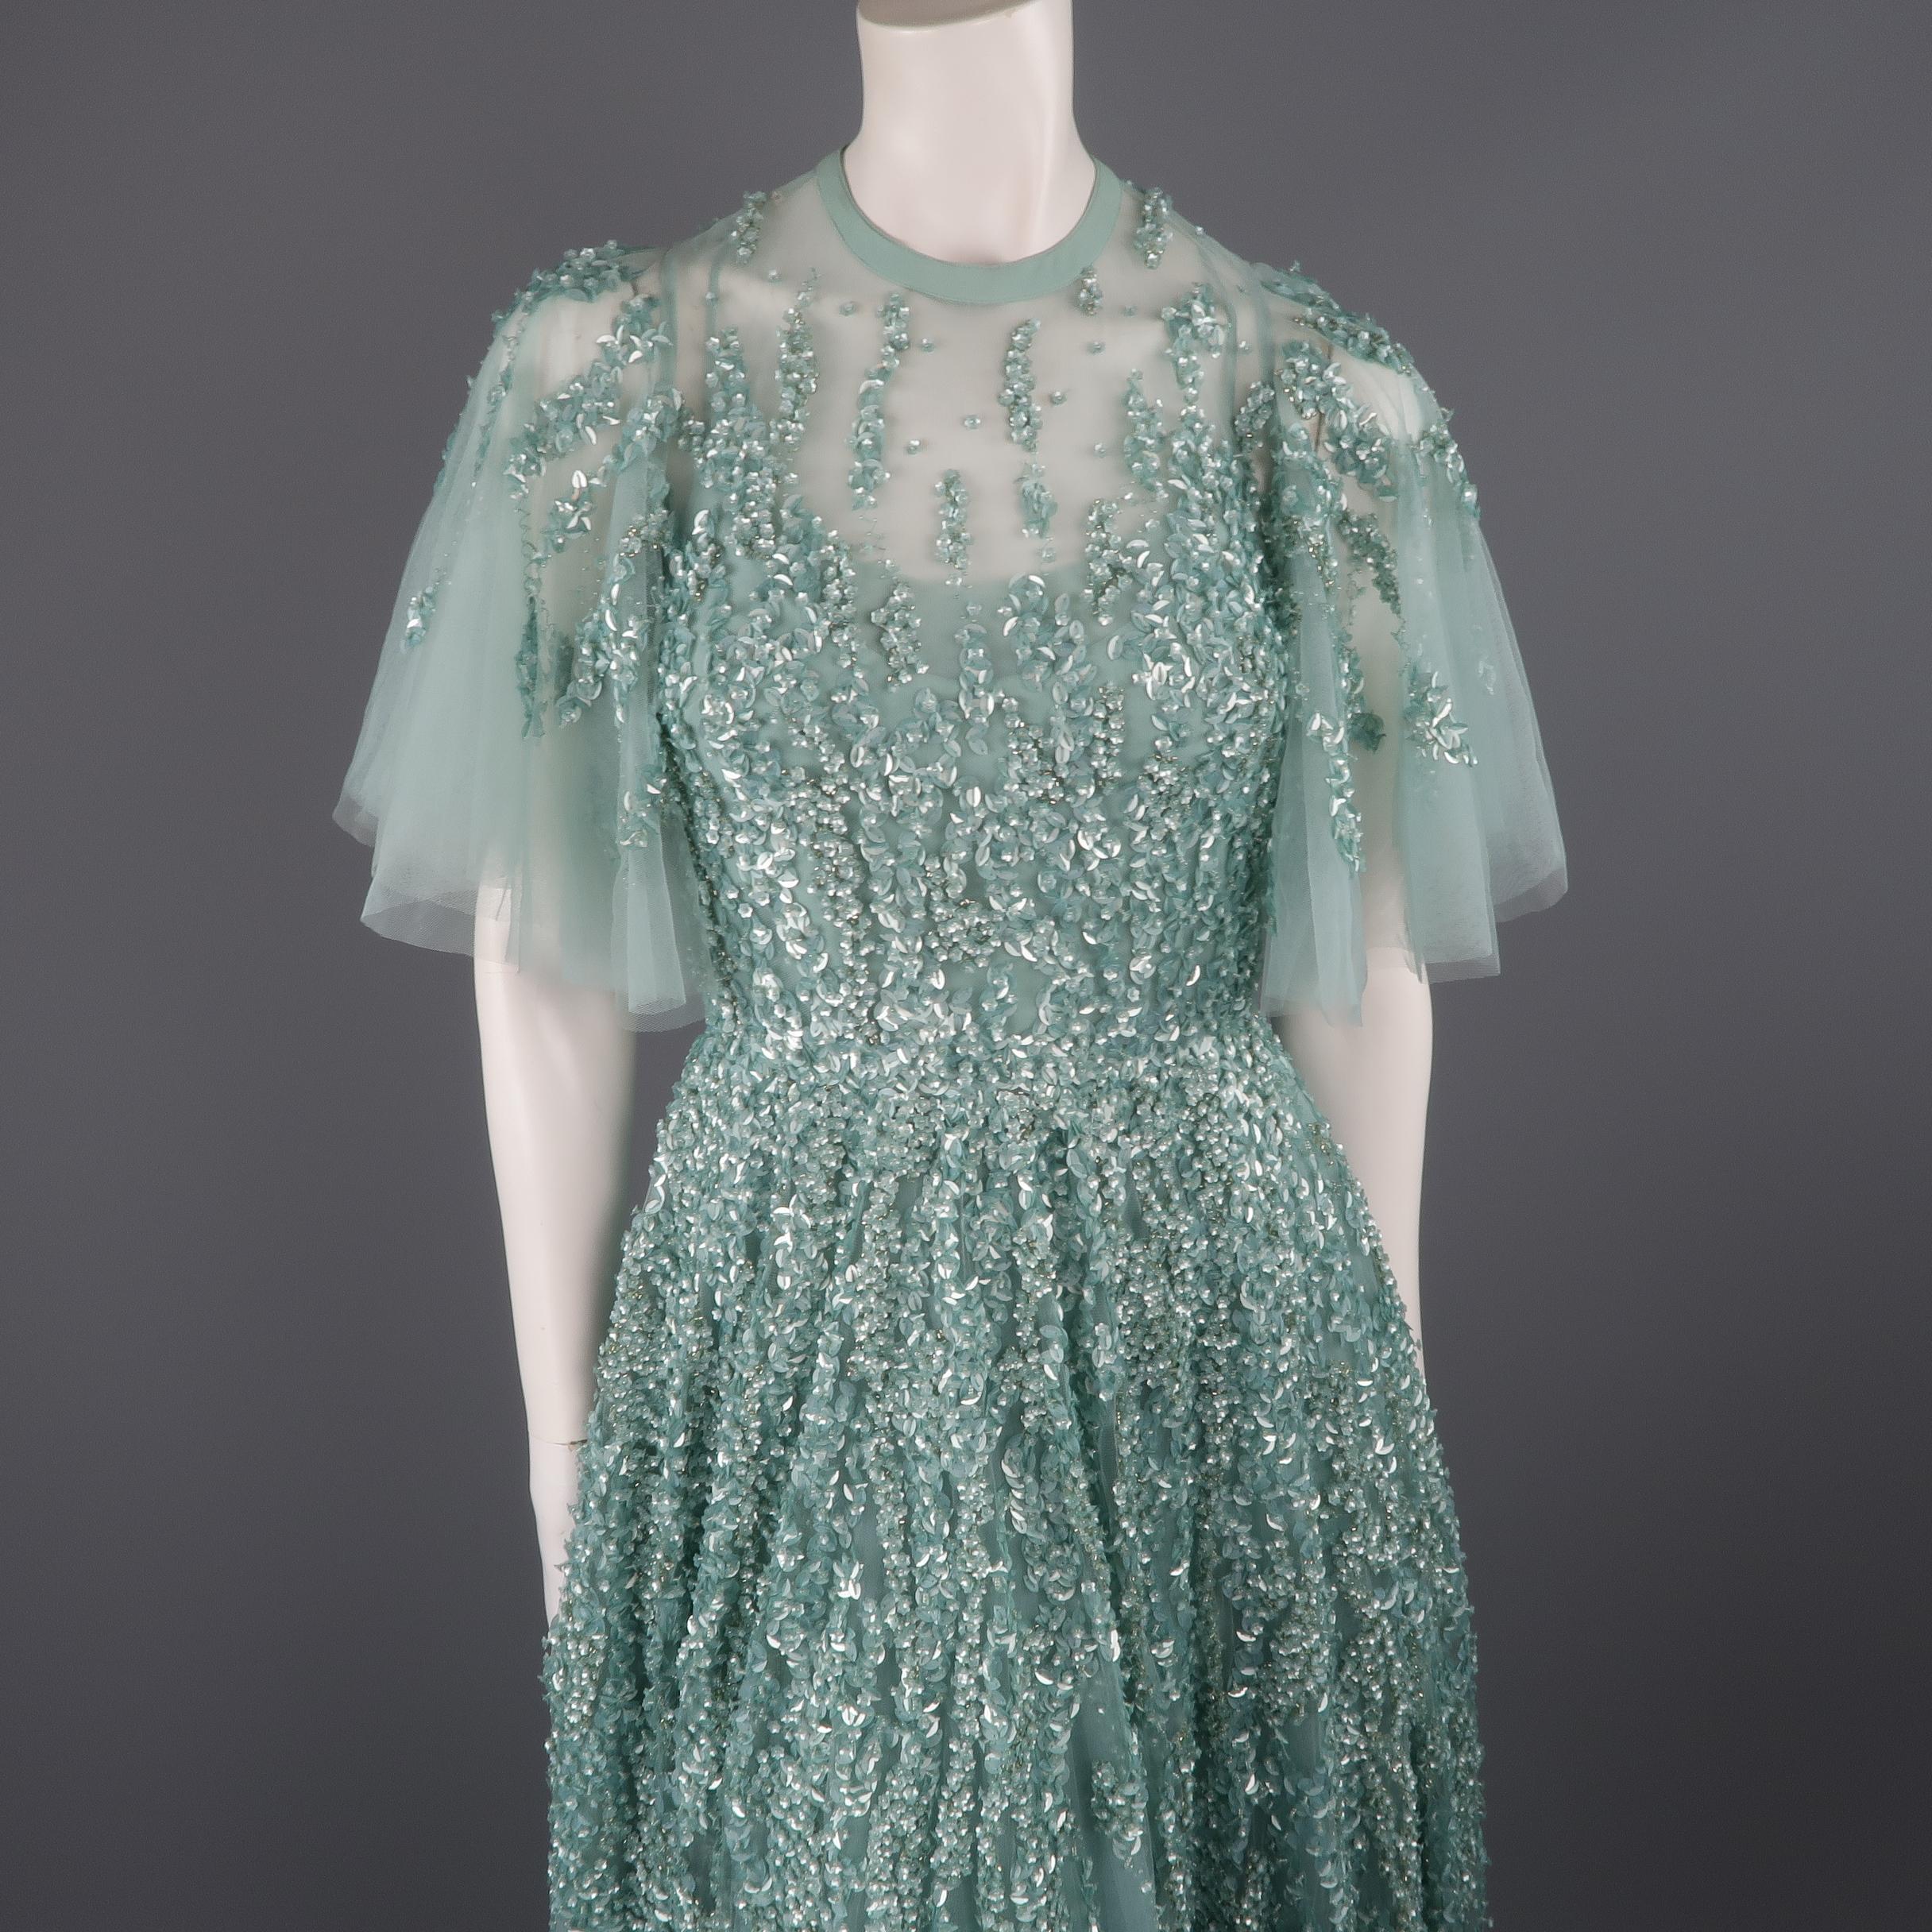 This gorgeous Elie Saab evening gown comes in layered sea foam teal green silk tulle with a round neckline, cropped ruffle sleeves, full layered skirt, and floral sequin beadwork throughout. New with Tags. Marked: FR 36
 
Measurements:
Shoulder: 11